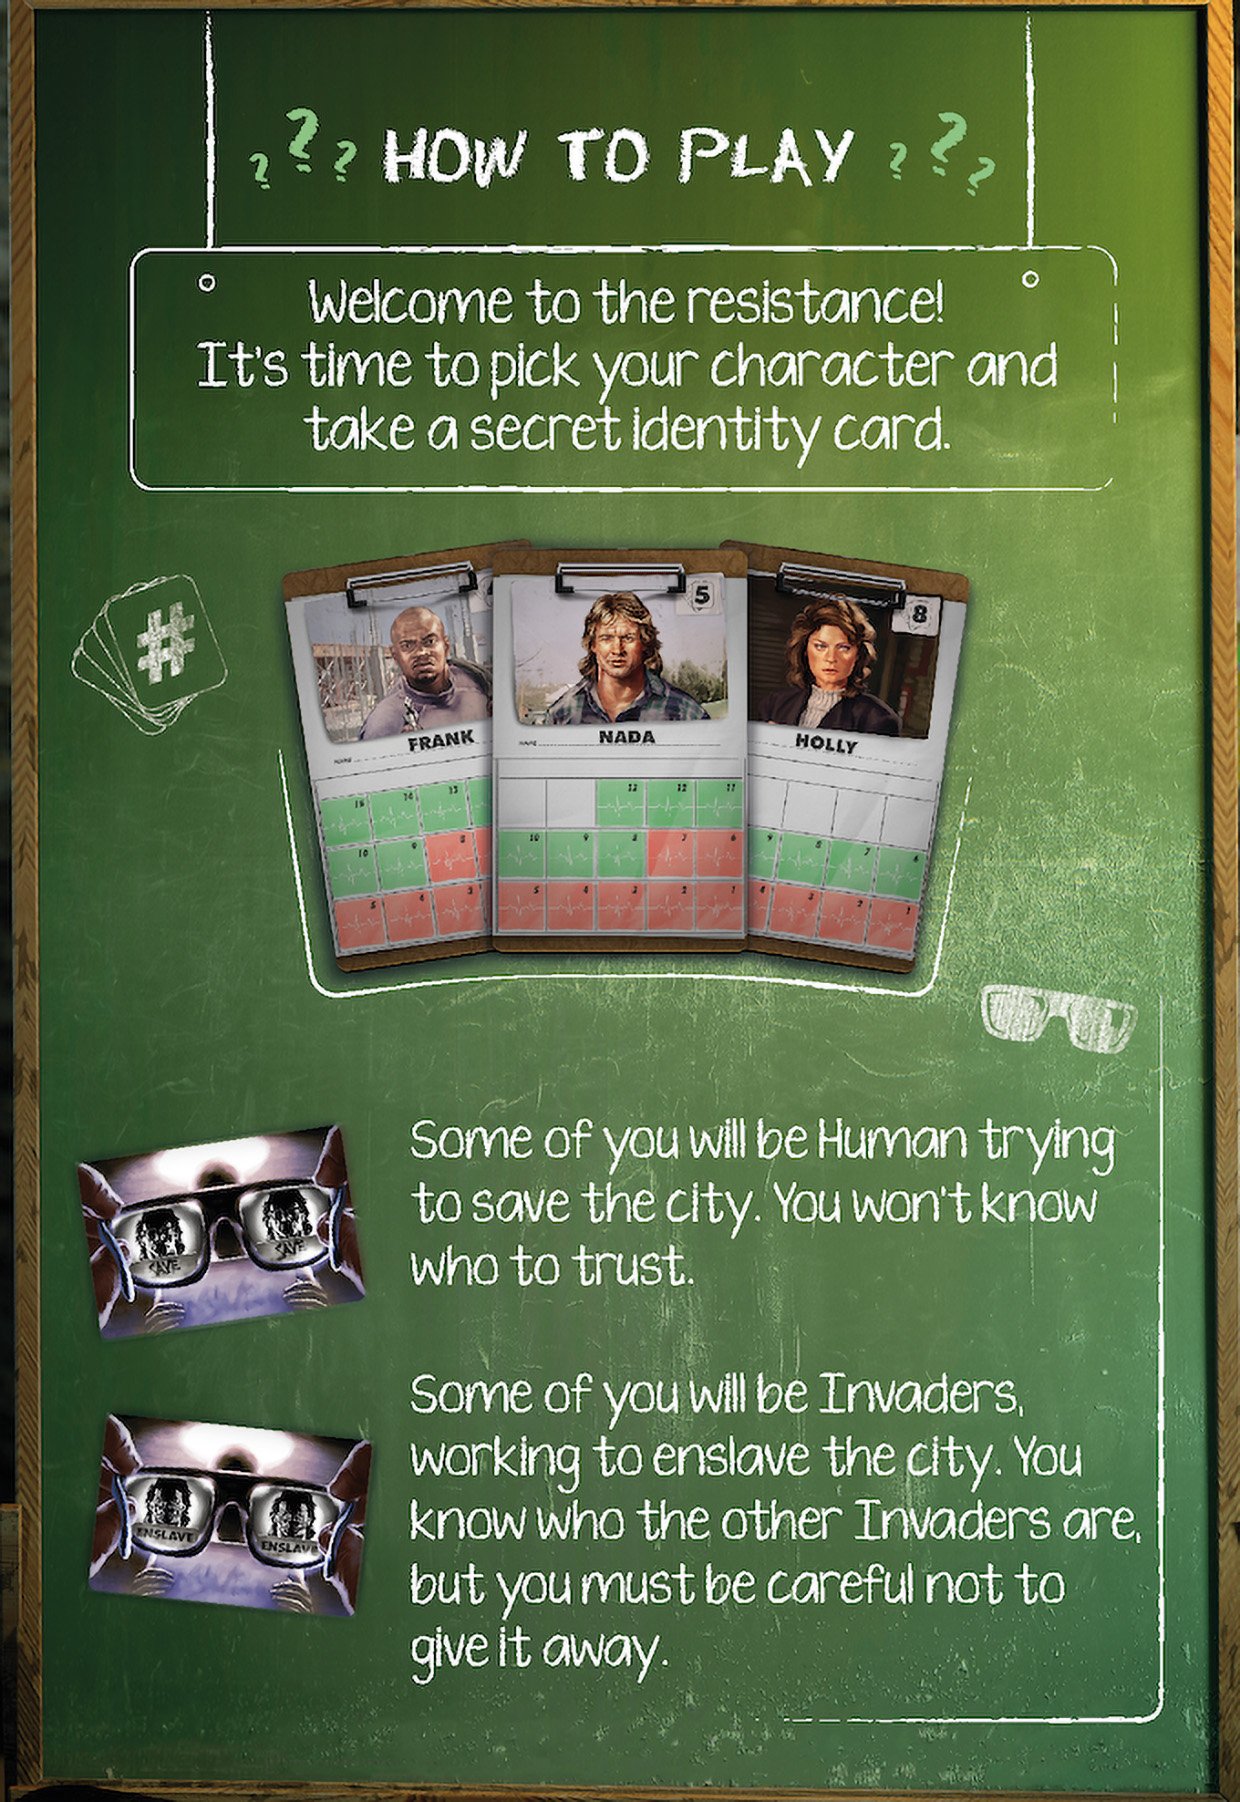 They Live: The Card Game